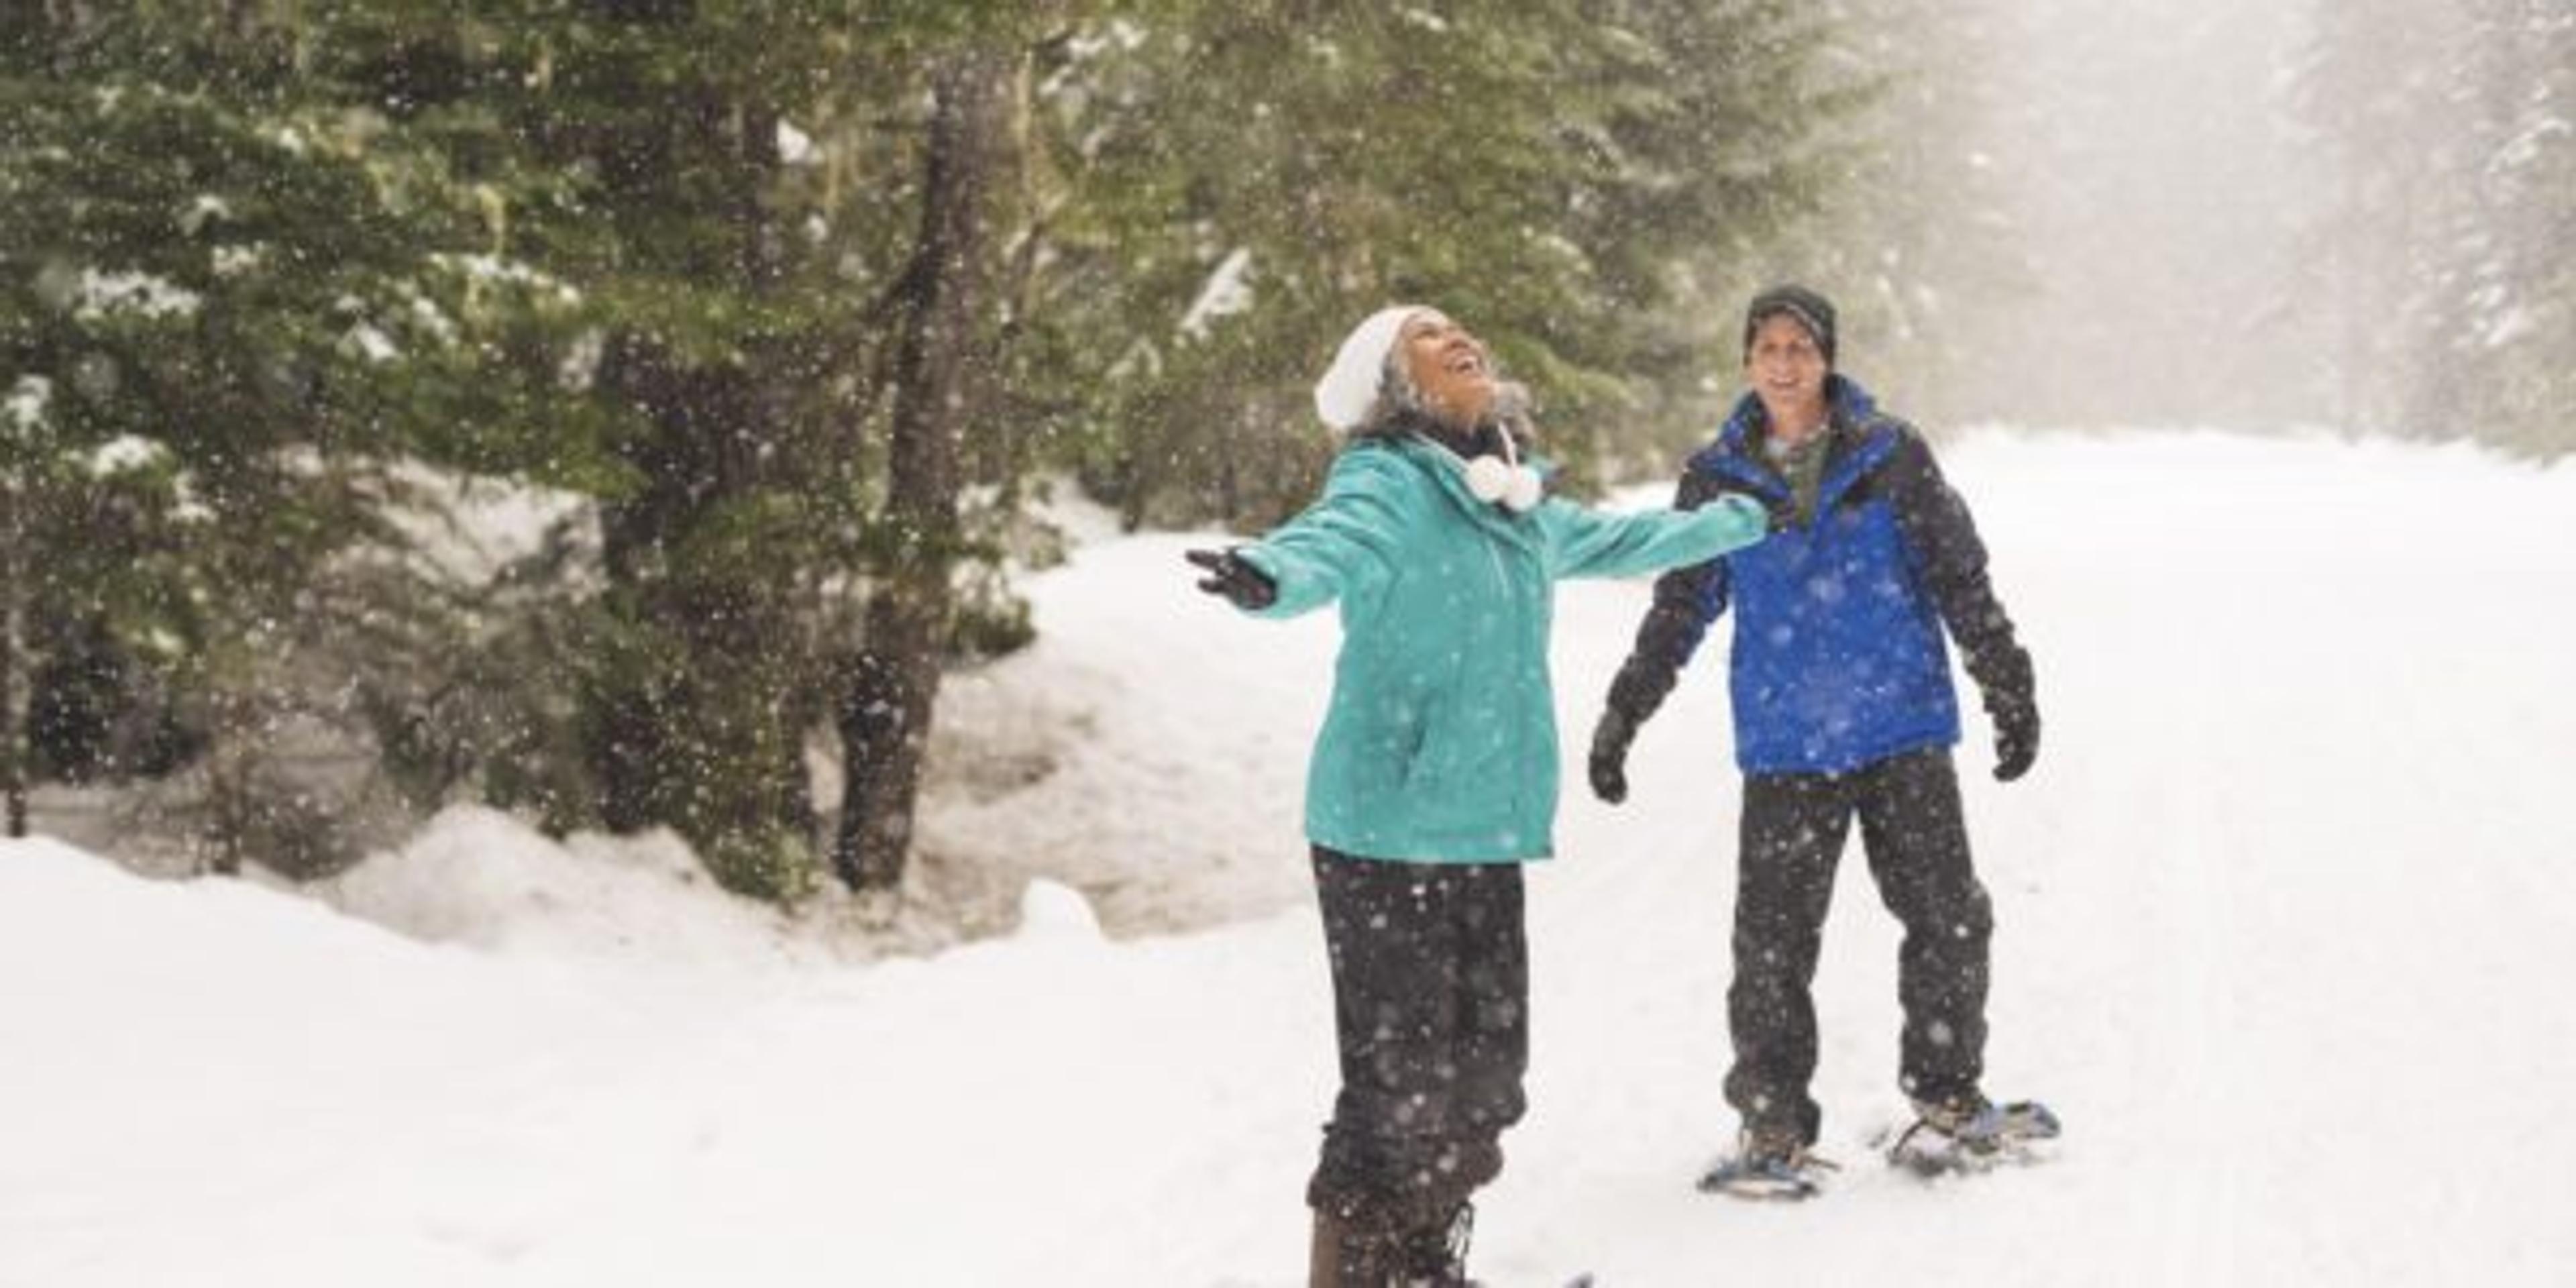 A mixed race senior couple joyfully embrace a snow shower while out for a walk in the forest. They are wearing snowshoes and warm clothing. The woman has her arms raised and is looking up at the falling snowflakes. The woman's husband is in the background walking towards her. He is smiling and watching her joyous display.